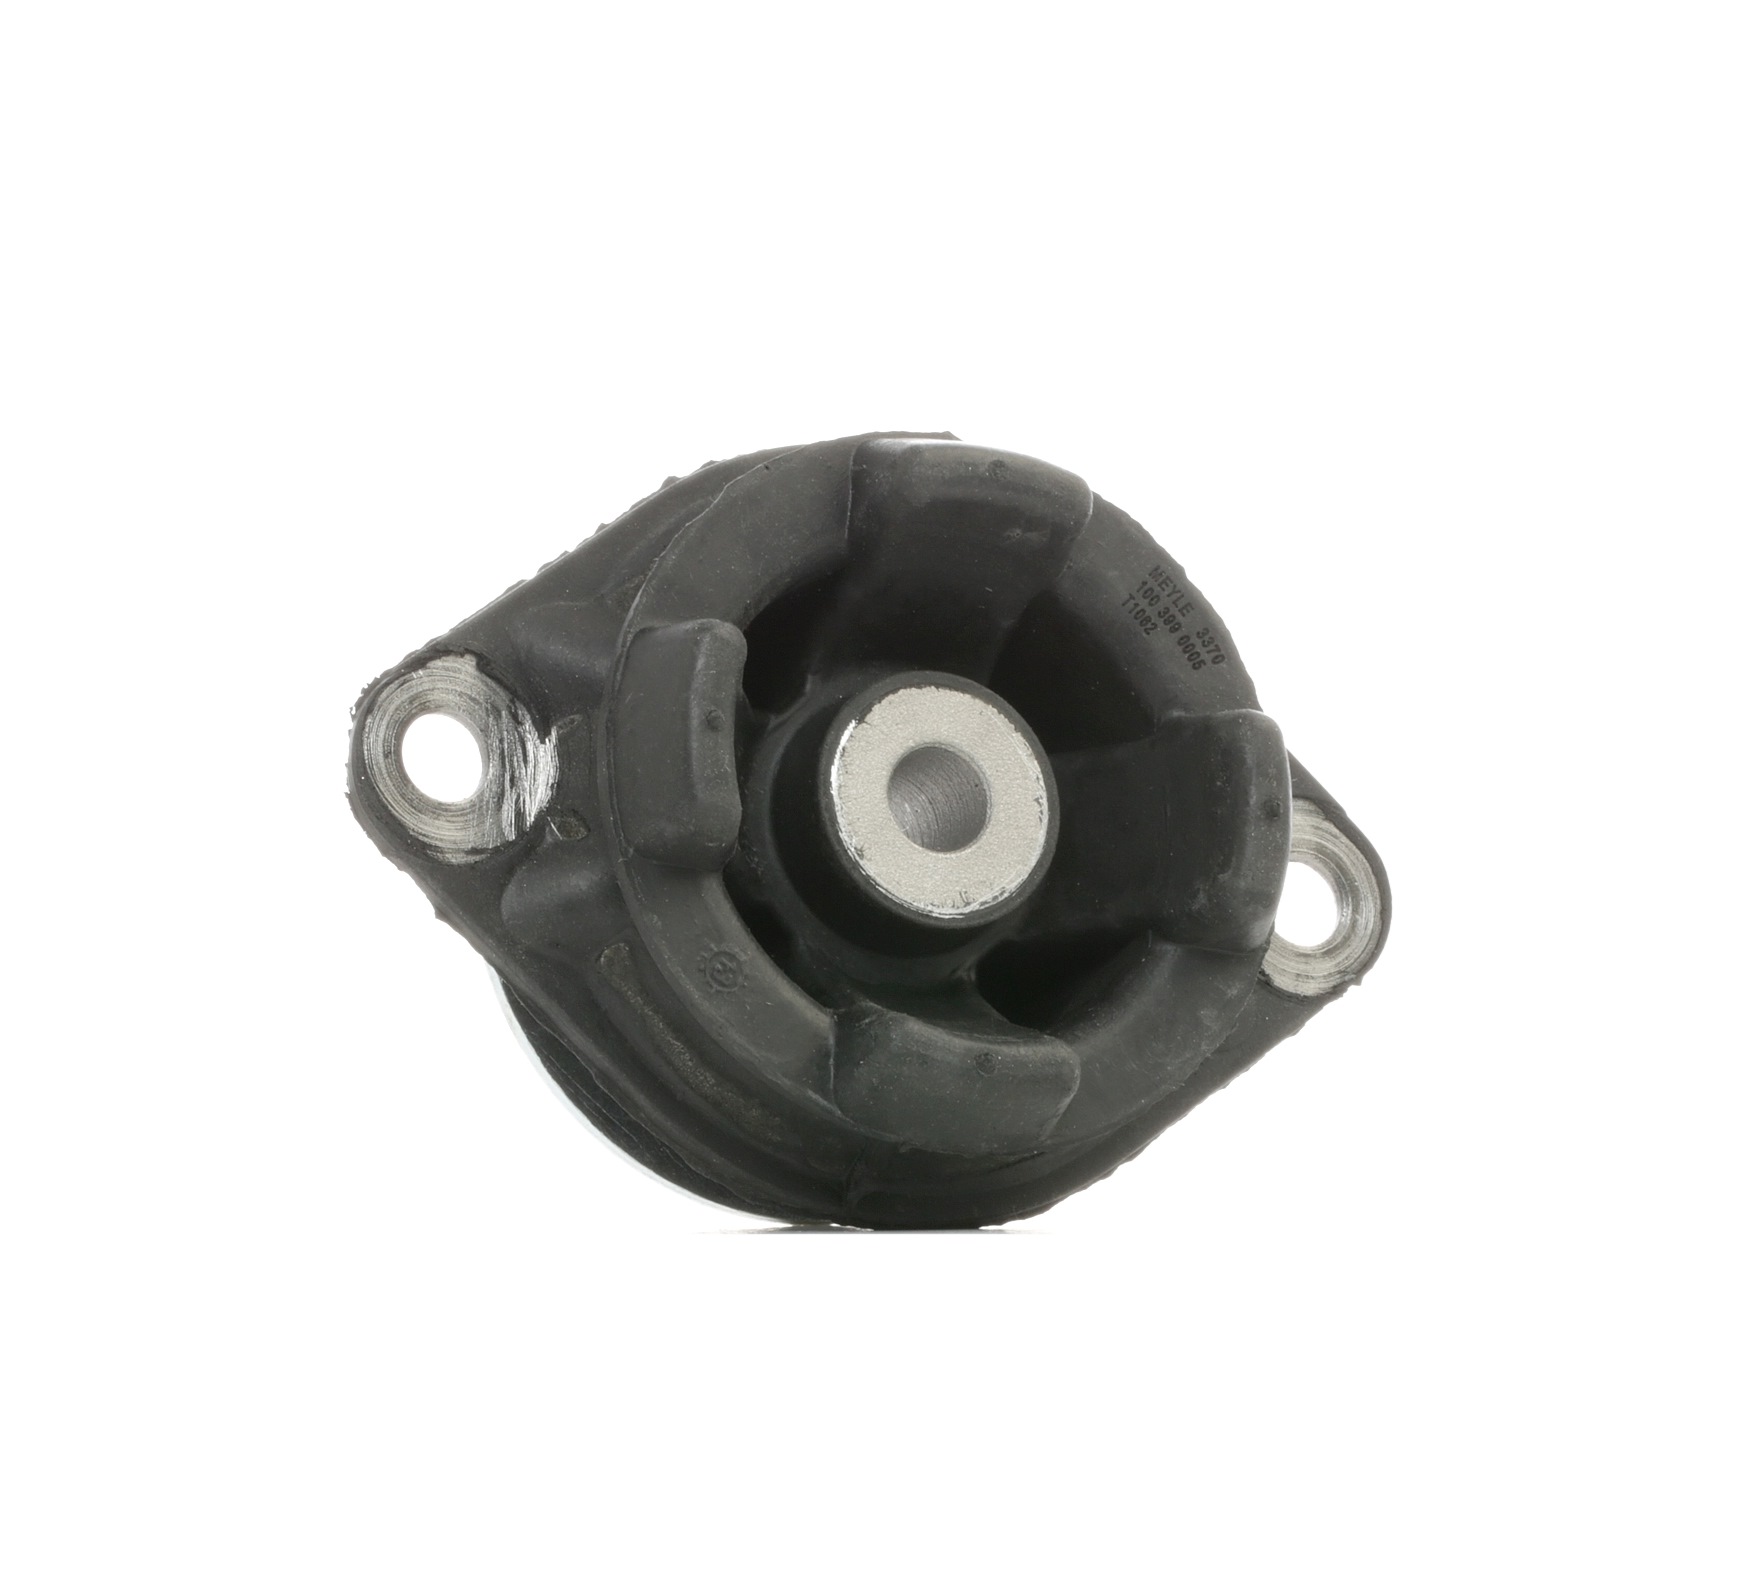 Image of MEYLE Gearbox Mount AUDI 100 399 0005 8A0399151D,MTM0031 Transmission Mount,Mounting, automatic transmission